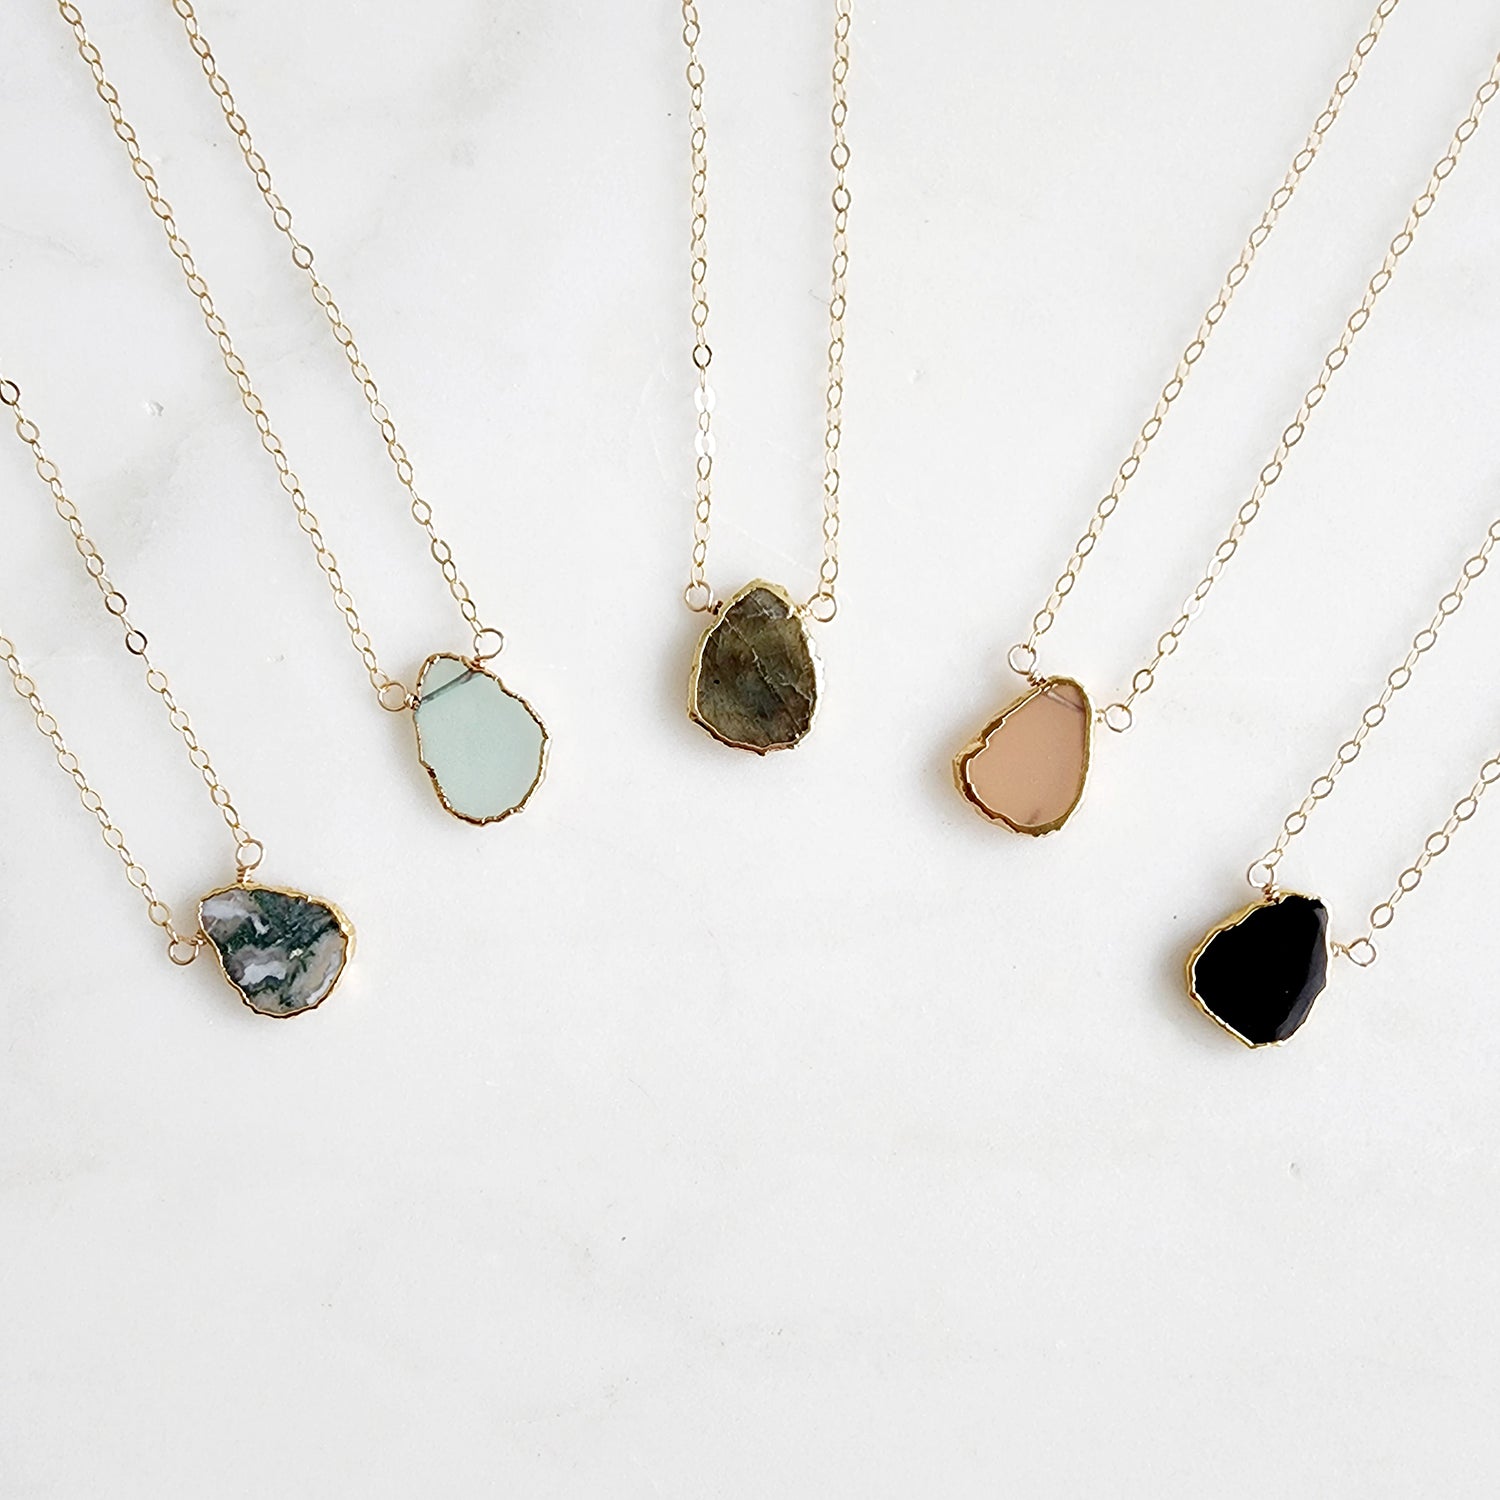 Gemstone Slice Necklaces in Gold. Layering Necklace. Aqua Chalcedony ...